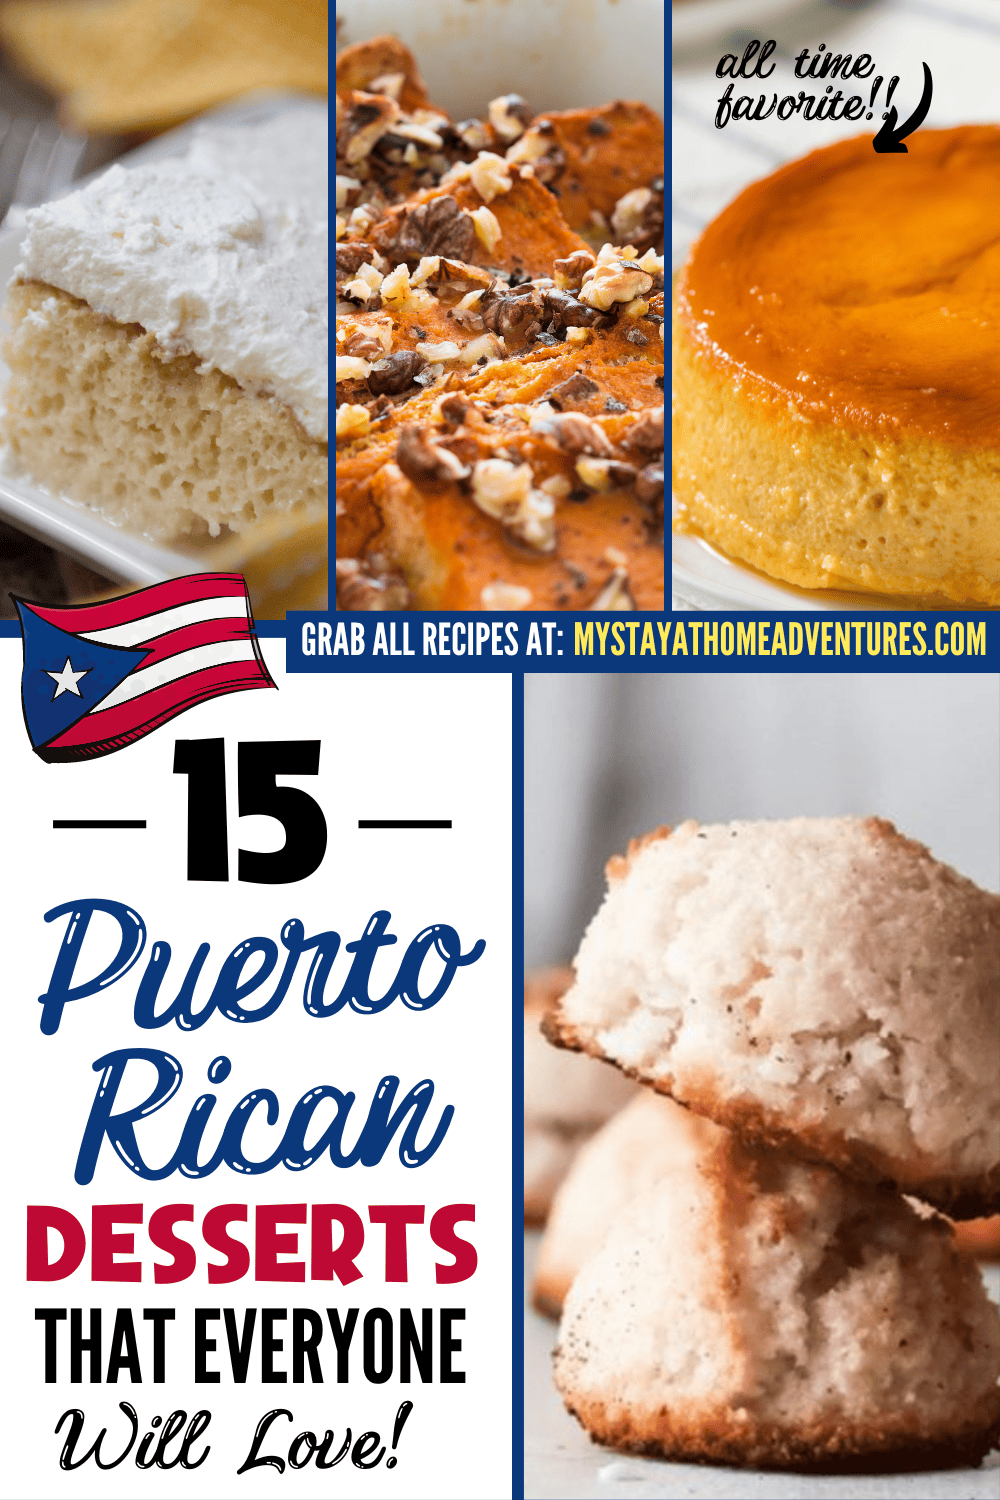 Puerto Rican sweets that will transport your taste buds to the tropics. Get ready to indulge in flan, arroz con dulce, and more! via @mystayathome